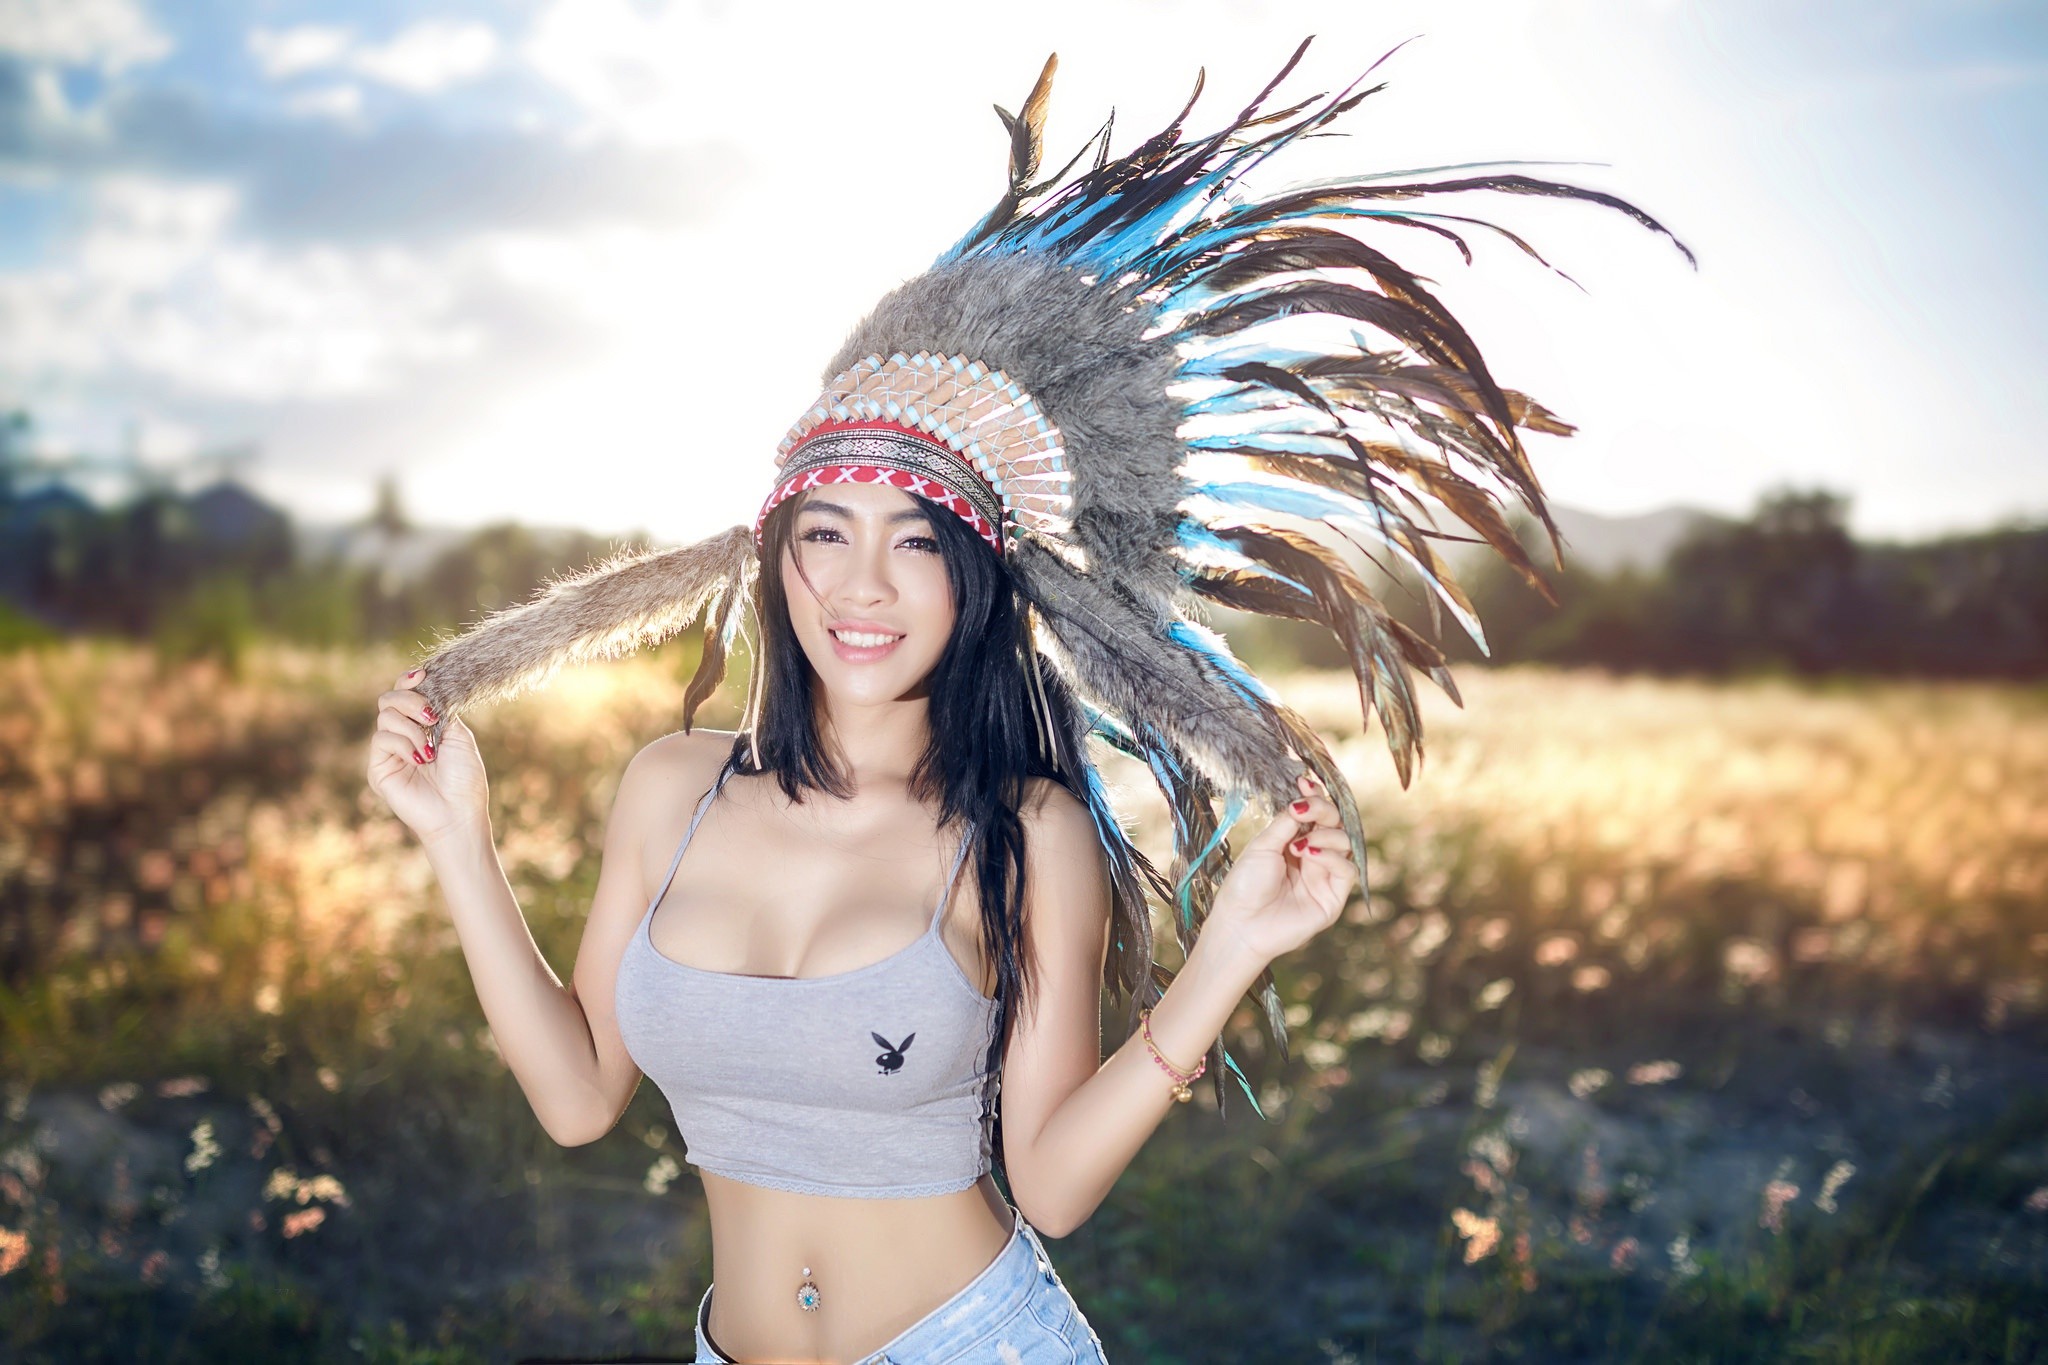 People 2048x1365 women feathers cleavage women outdoors field Native American clothing Native Americans smiling boobs dark hair painted nails pierced navel nature Asian Playboy